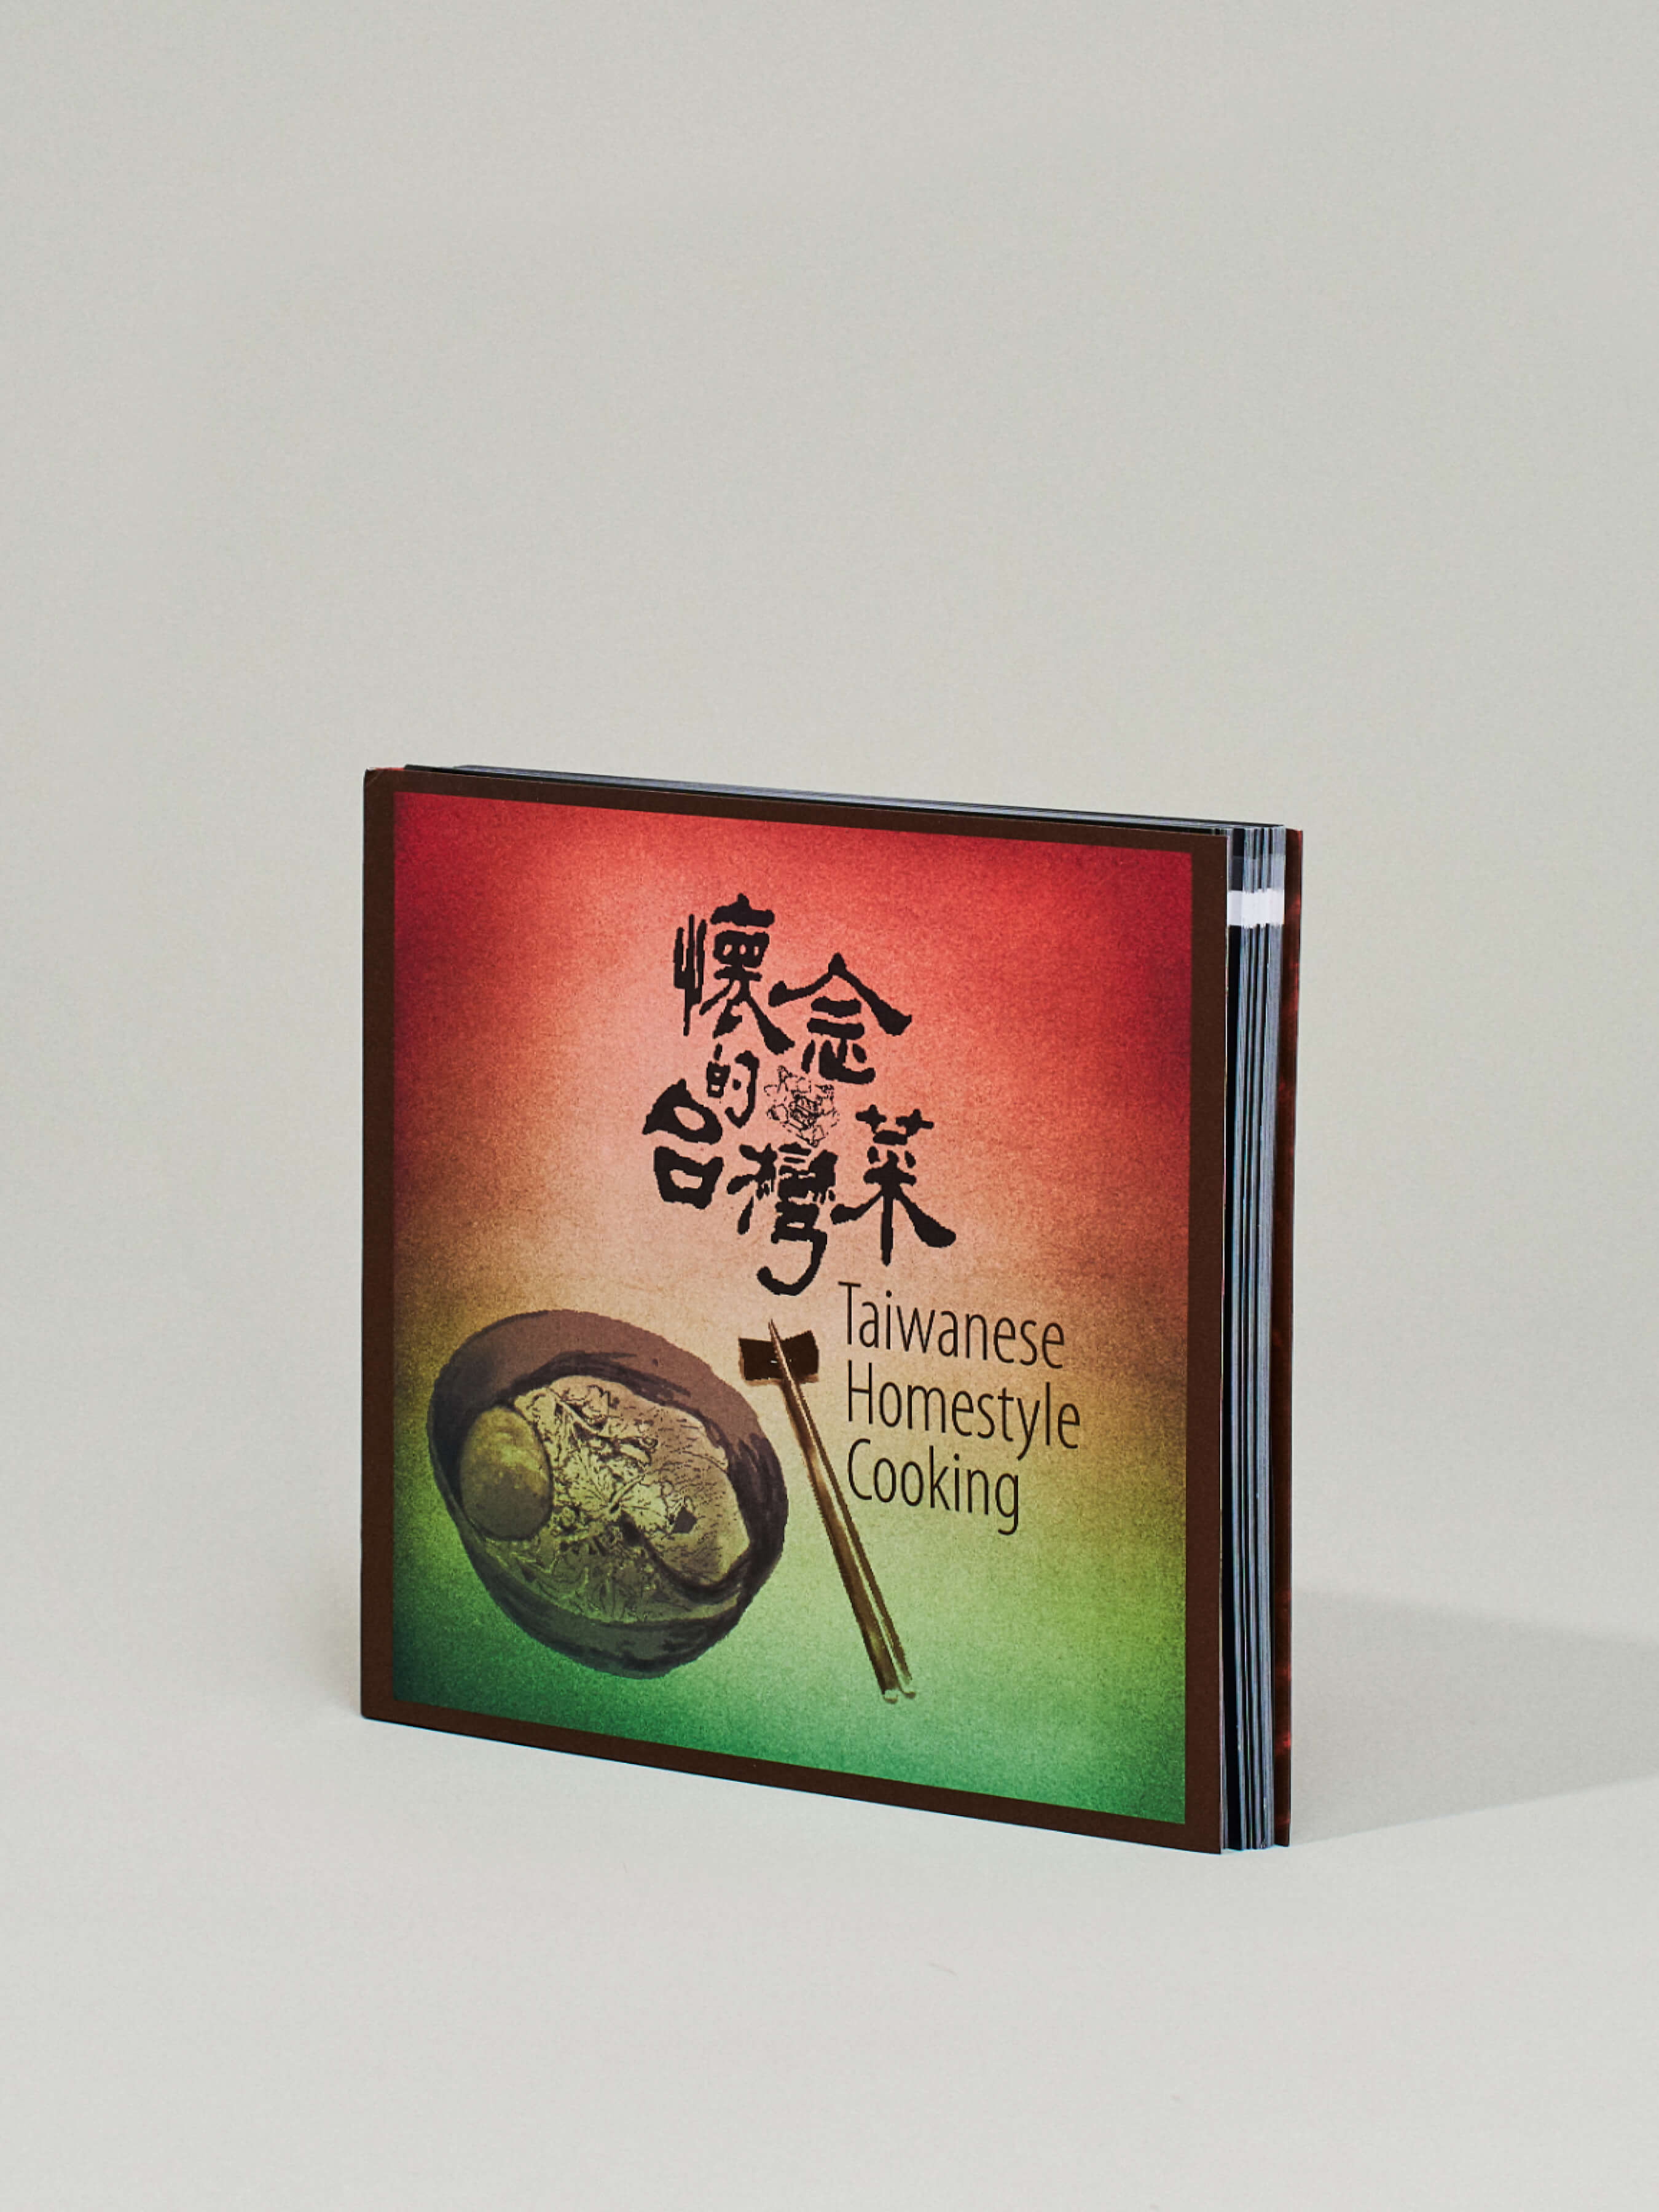 Taiwanese Homestyle Cooking Cookbook